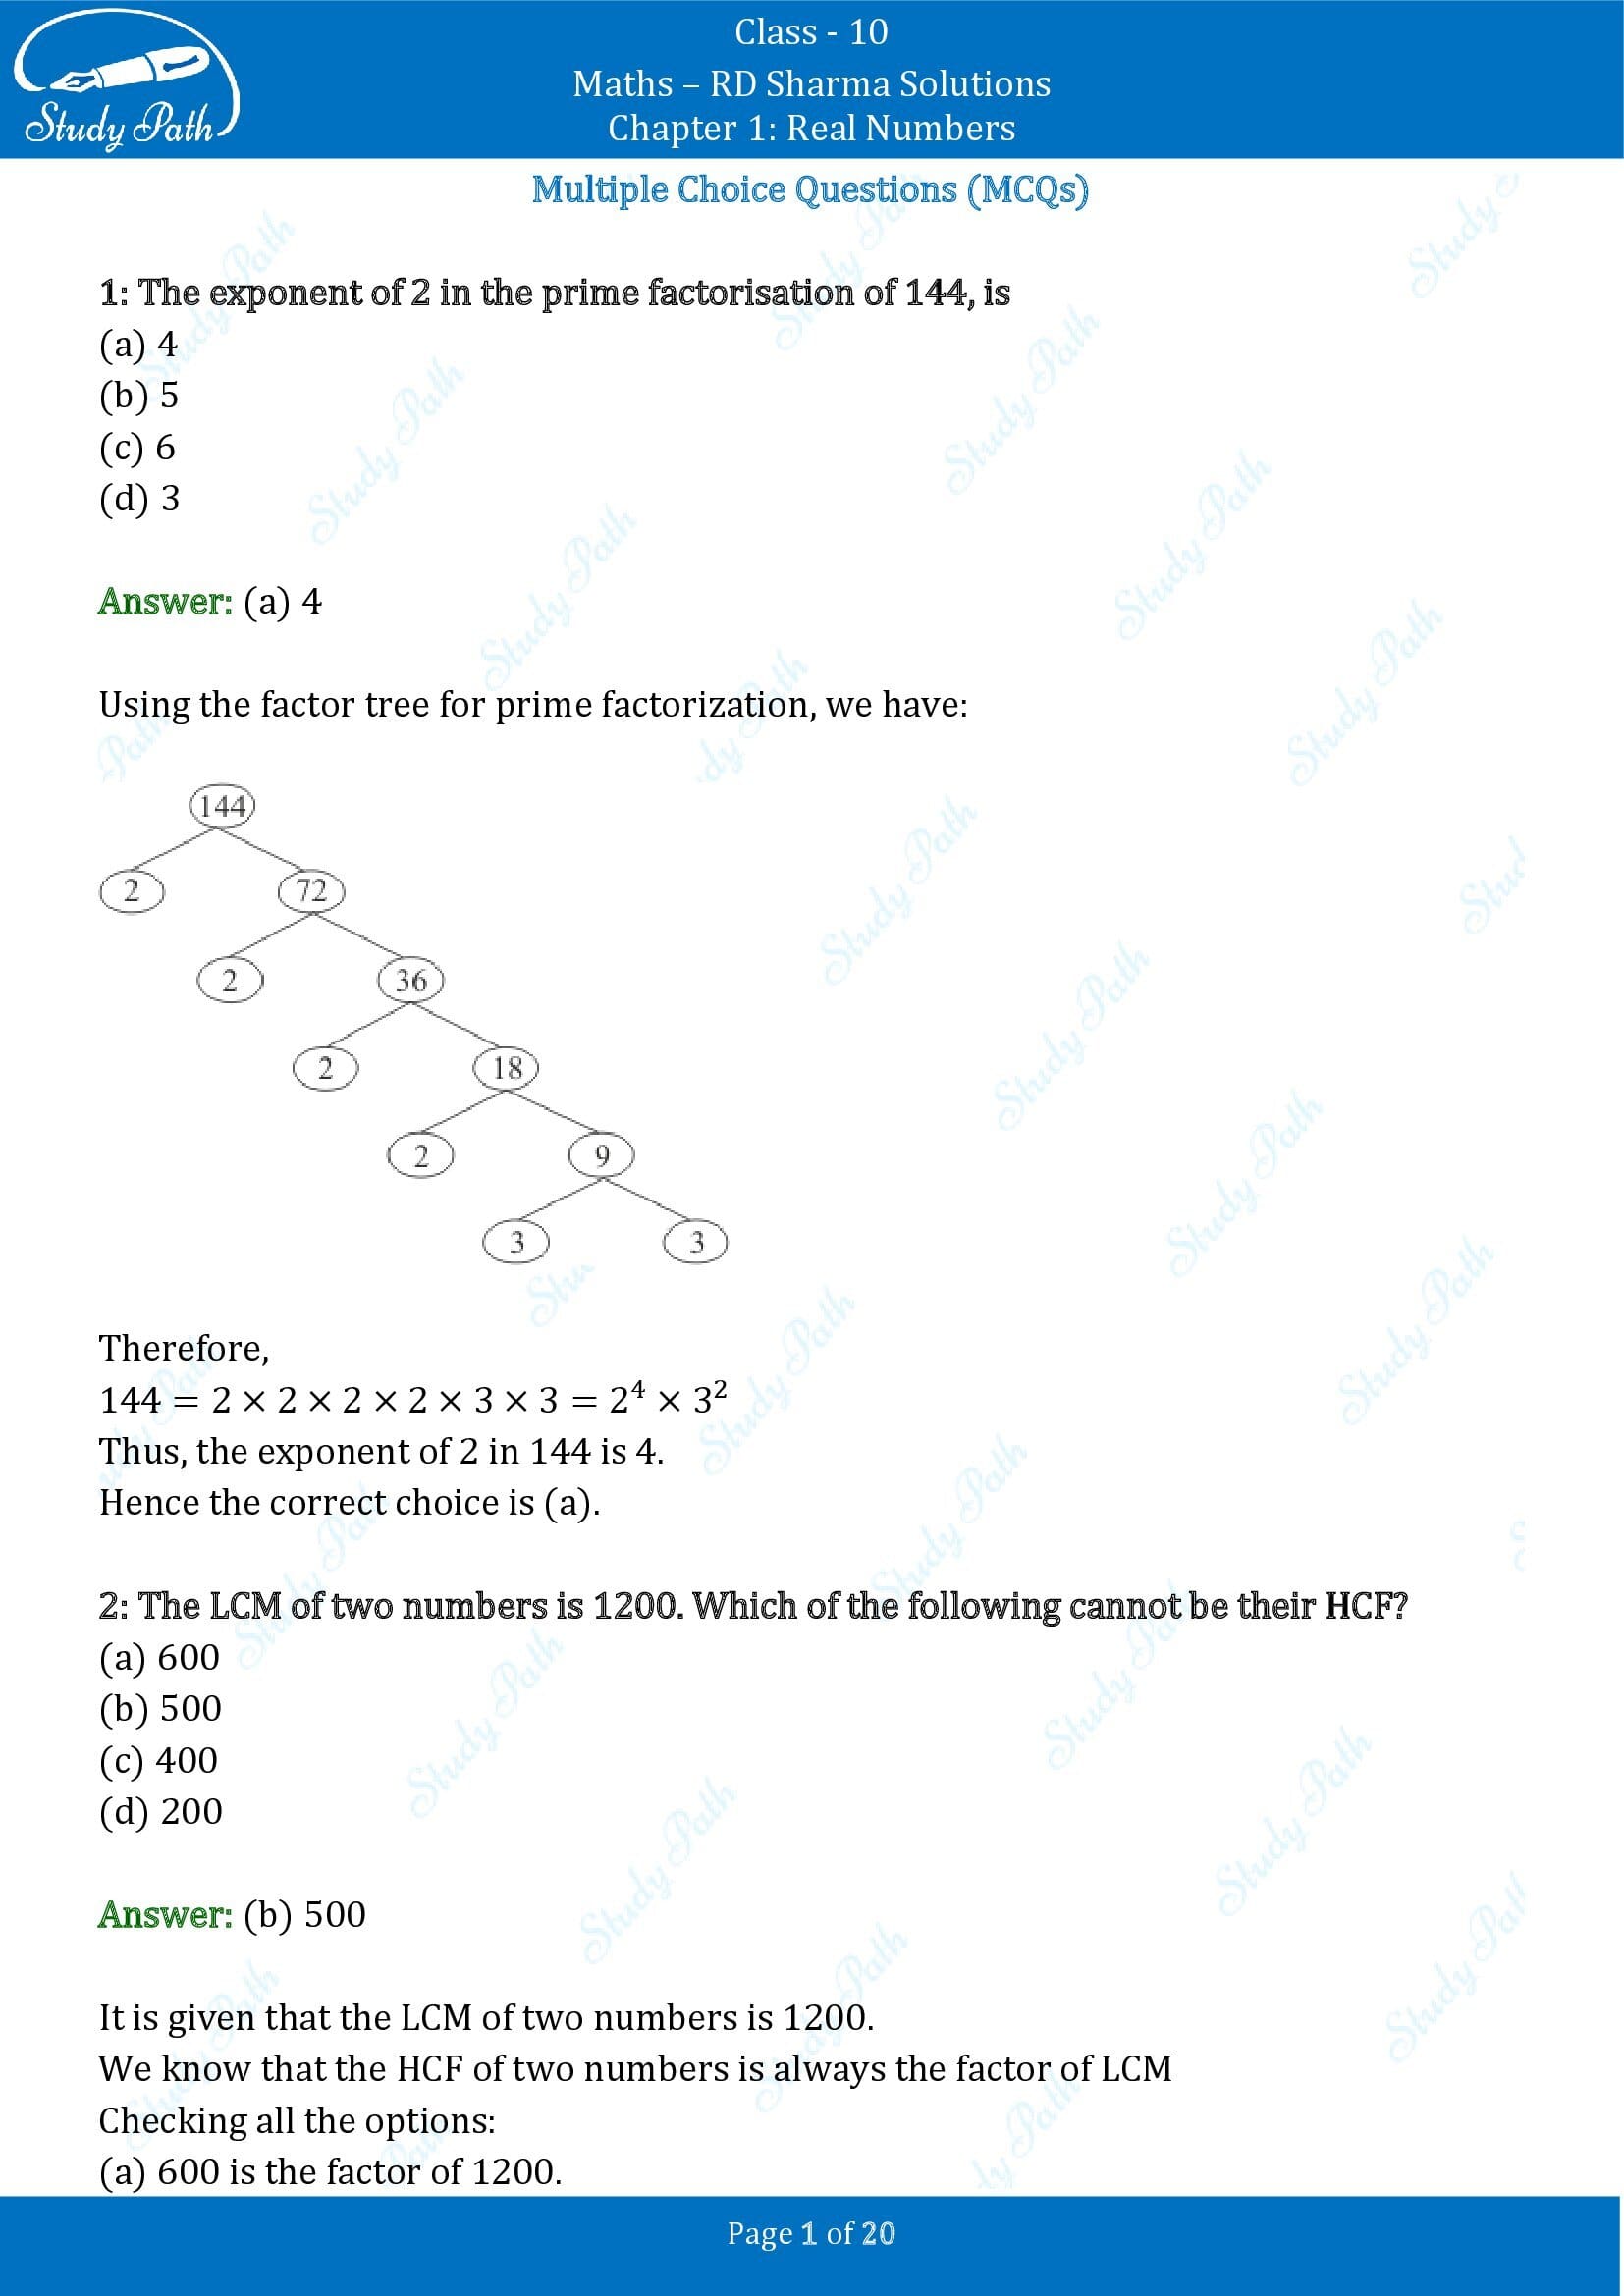 RD Sharma Solutions Class 10 Chapter 1 Real Numbers Multiple Choice Questions MCQs 00001